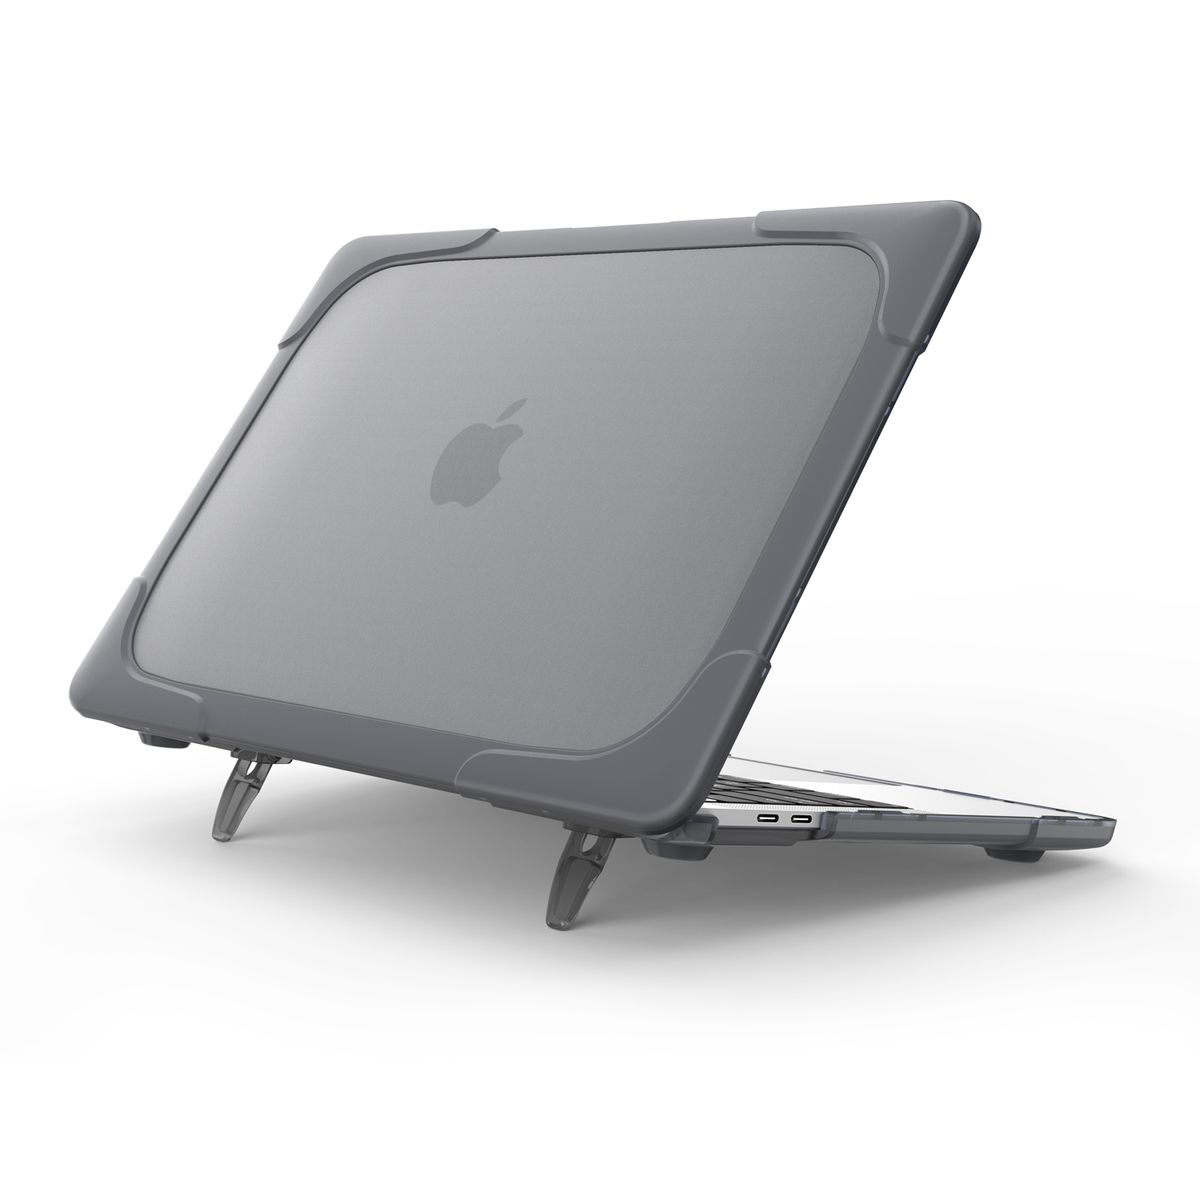 Candy Shell Case For MacBook Air M1 (Model: Air 13, A1932)